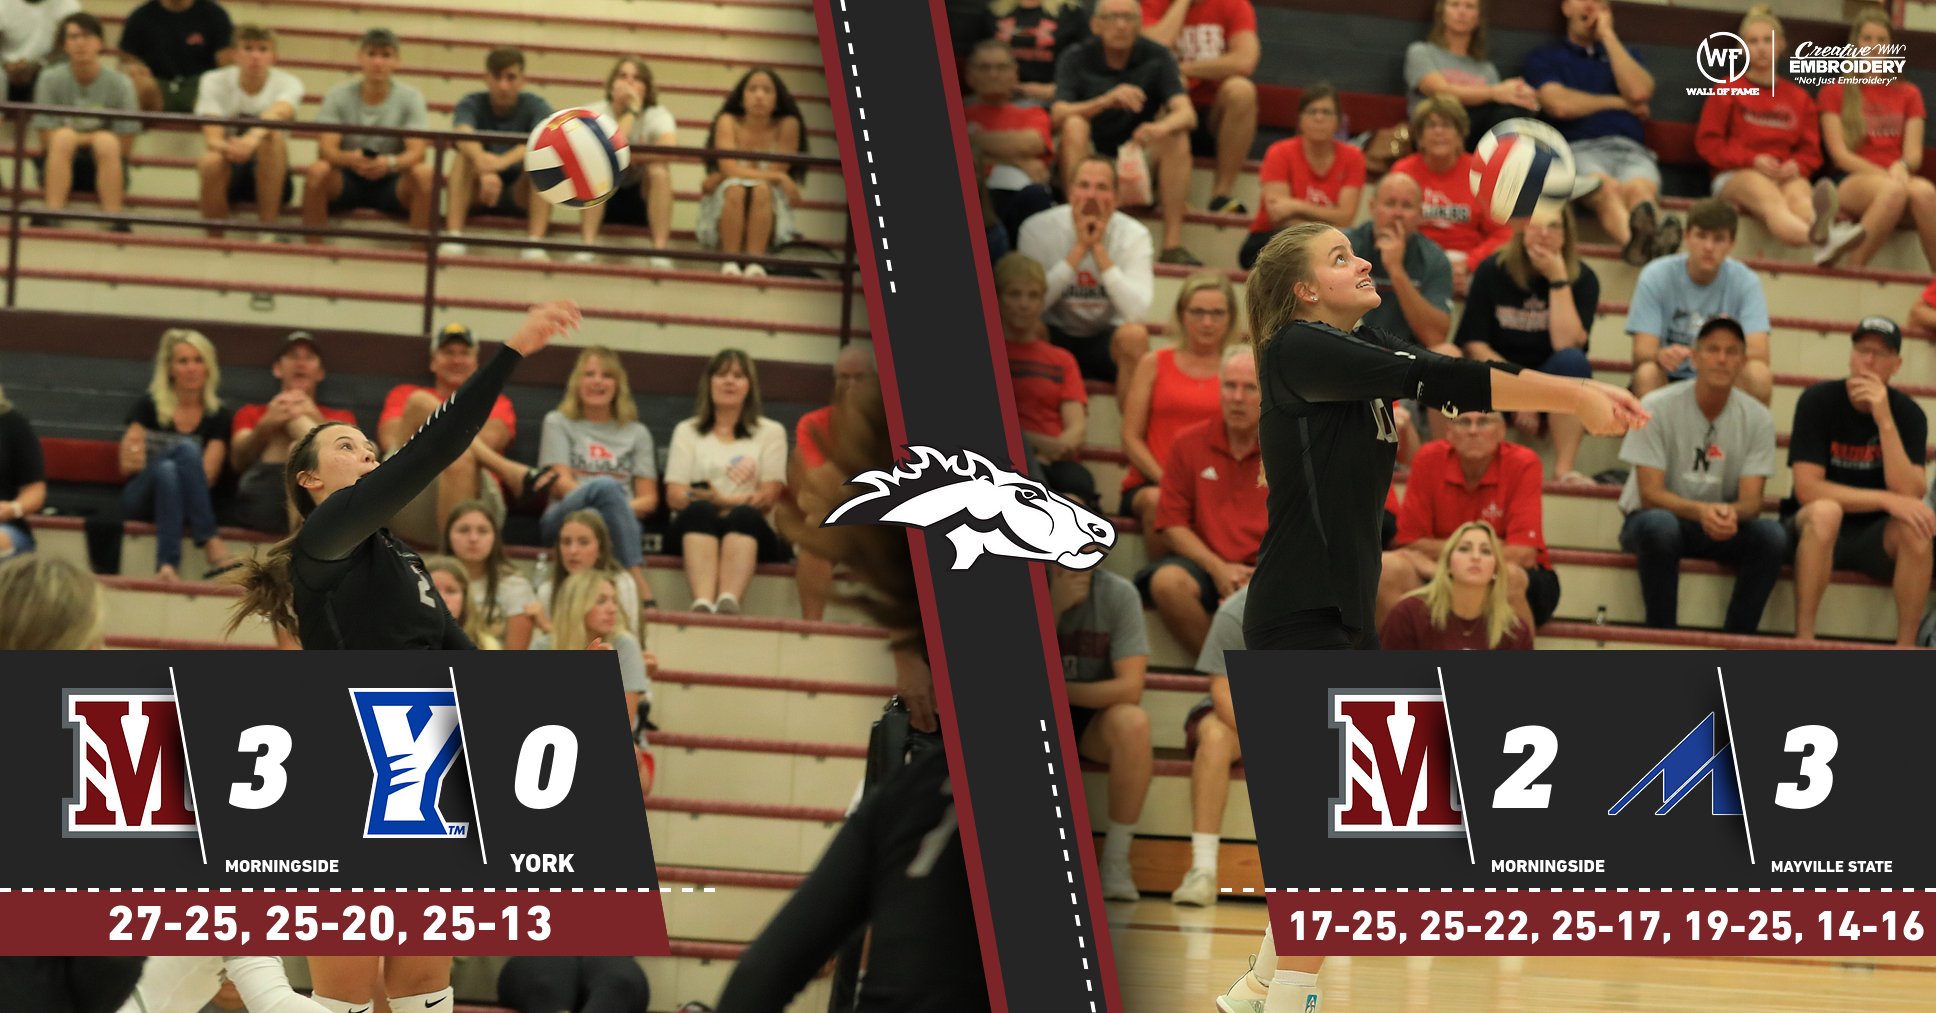 Morningside defeats York 3-0, loses to Mayville 3-2